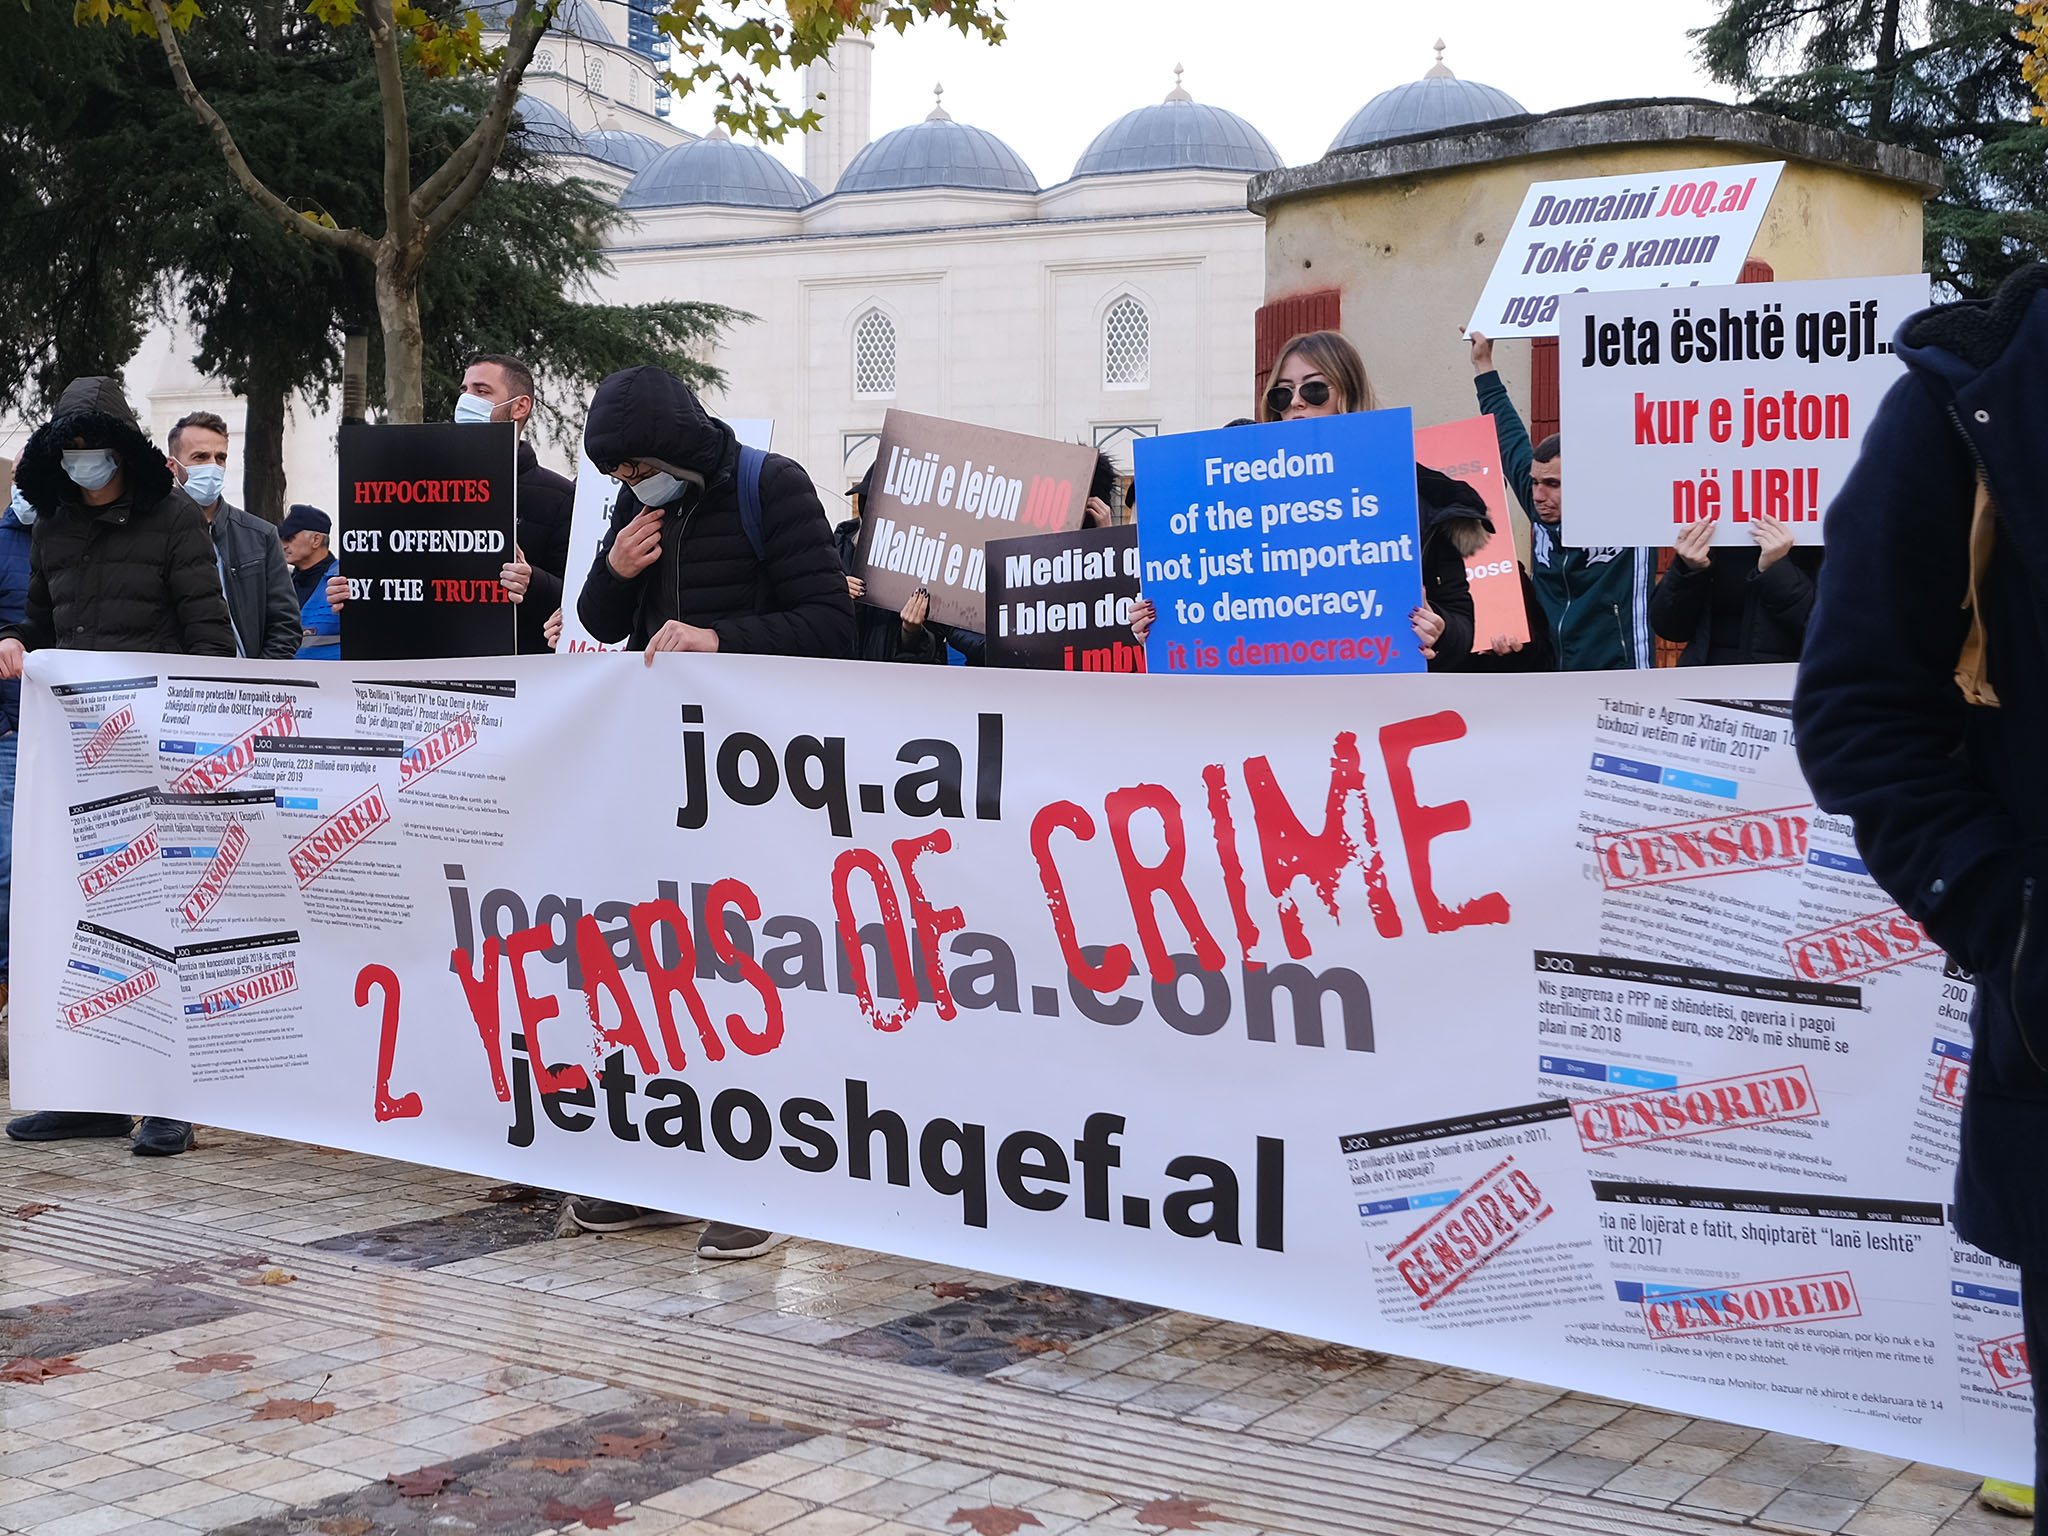 2 years since the closure of JOQ ALBANIA / Citizens protest in front of the Parliament, lawsuit against AKEP